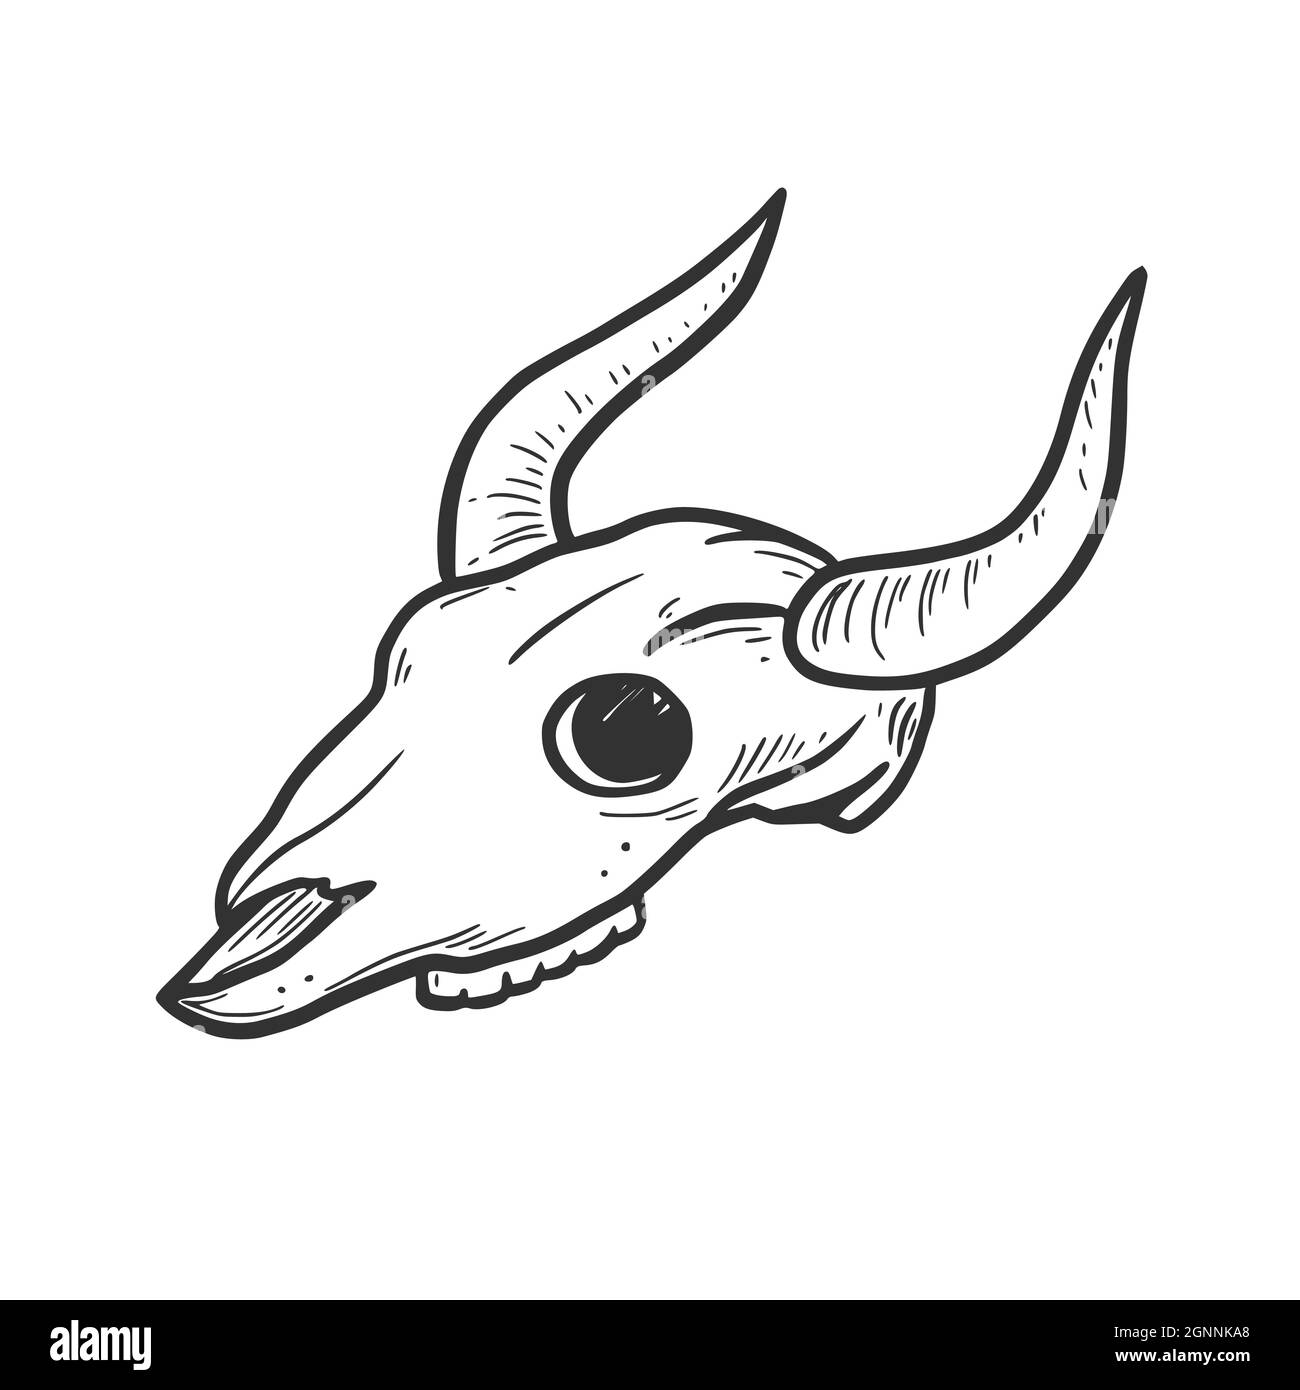 5,202 Cow Skull Drawing Images, Stock Photos & Vectors | Shutterstock